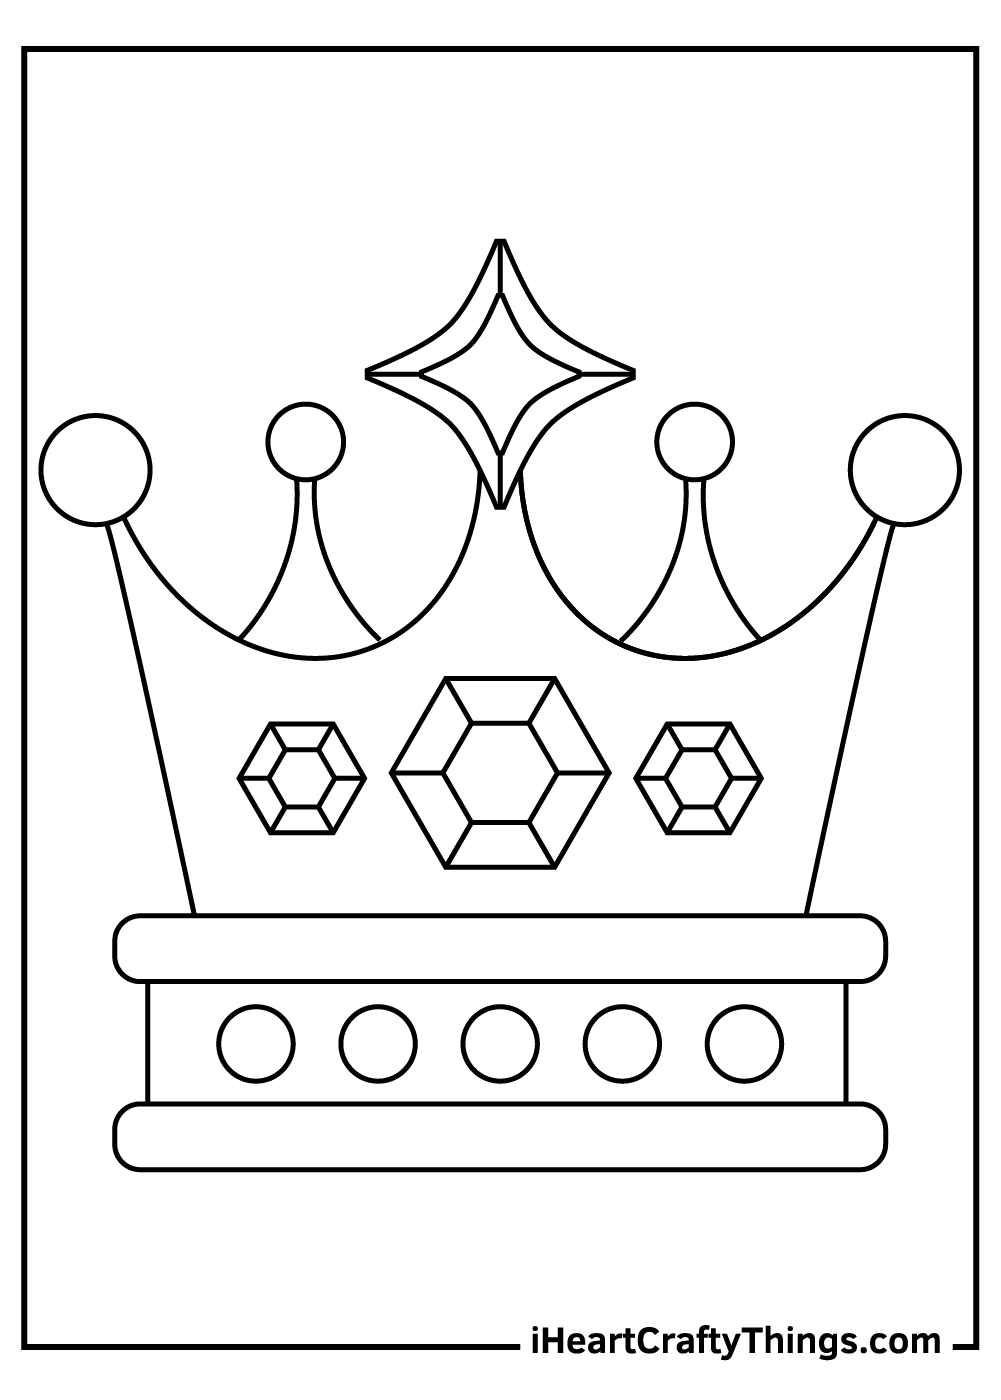 princess crown coloring pages to print